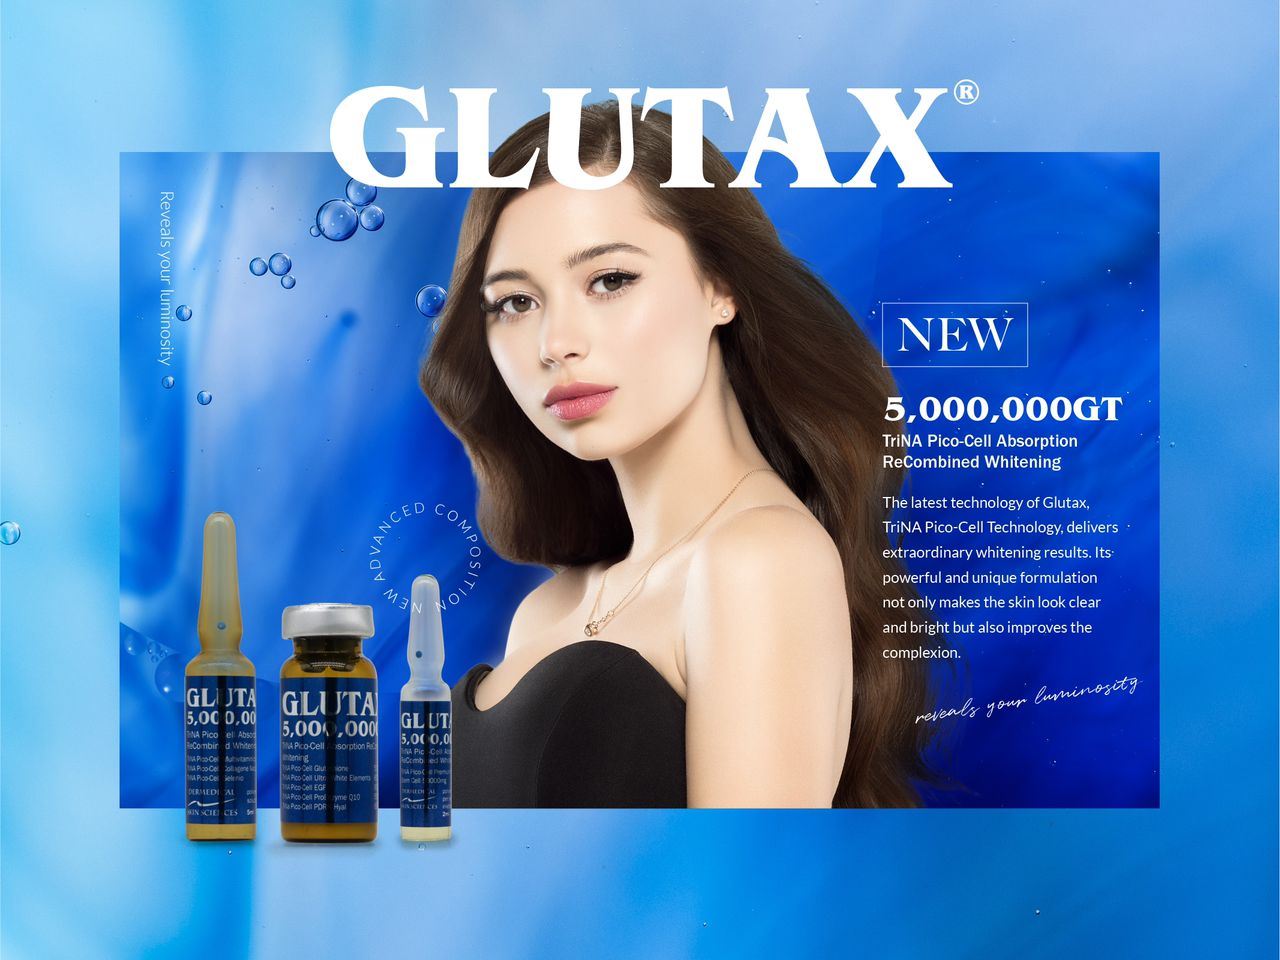 Glutax 5000000GT TriNA Pico Cell Glutathione Skin Whitening Injection | Healthcarebeauty